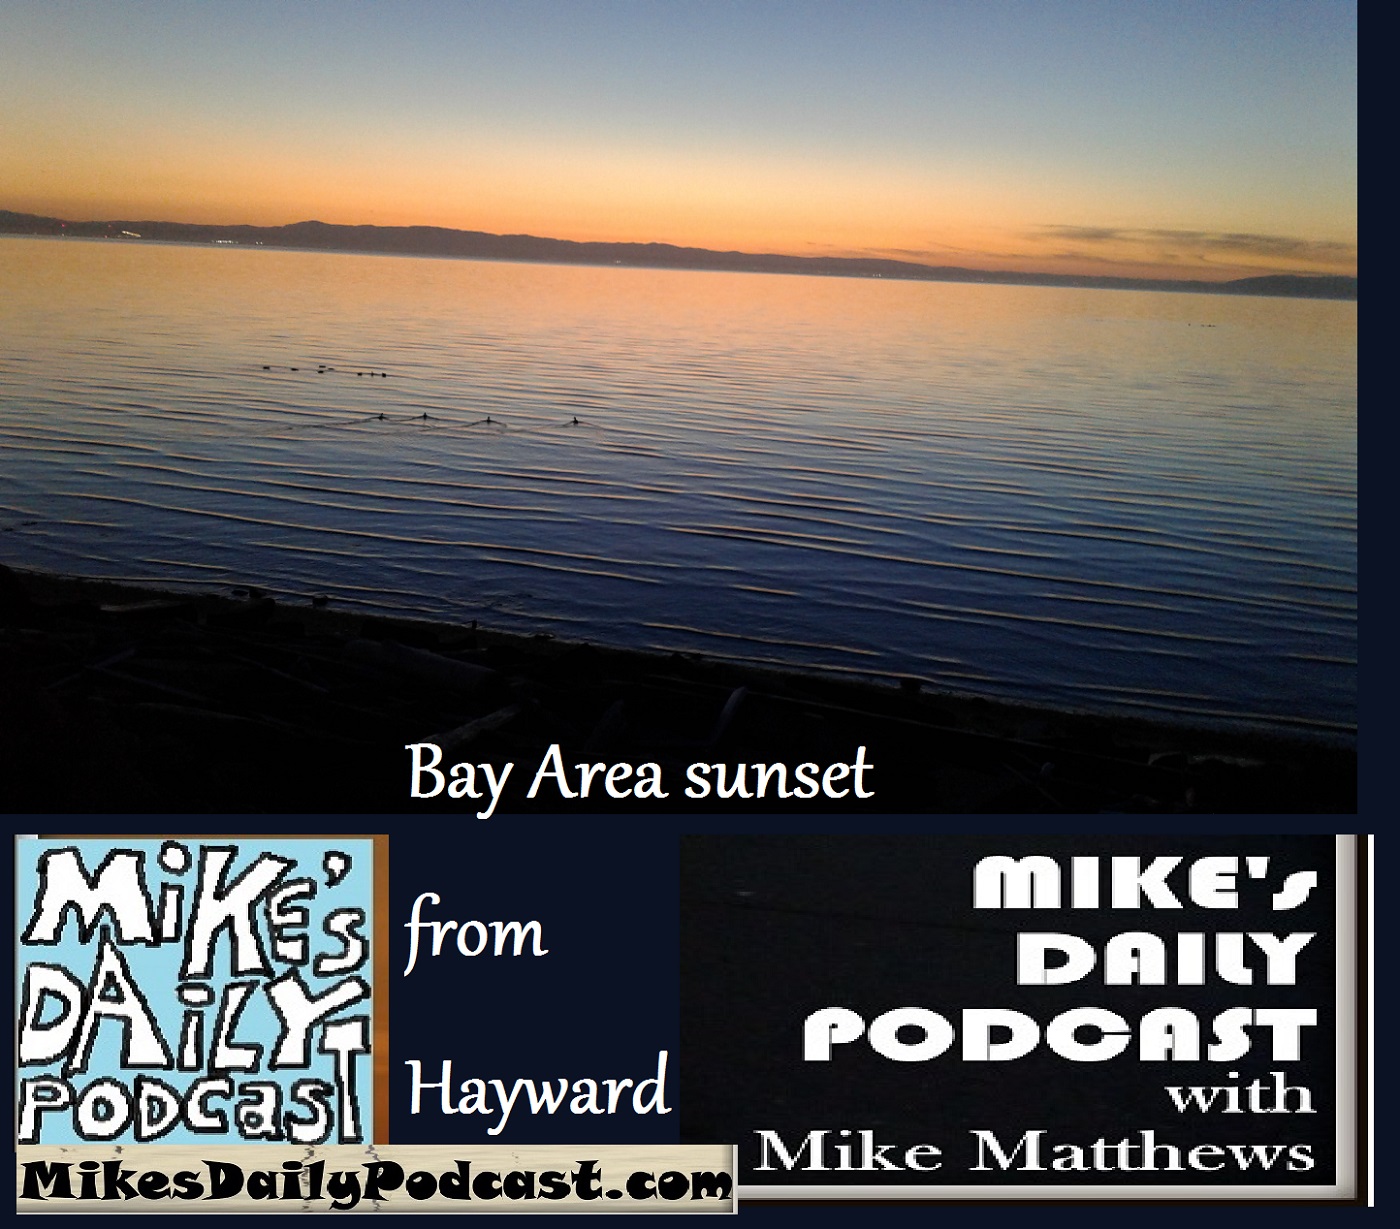 mikes-daily-podcast-1213-bay-area-sunset-hayward